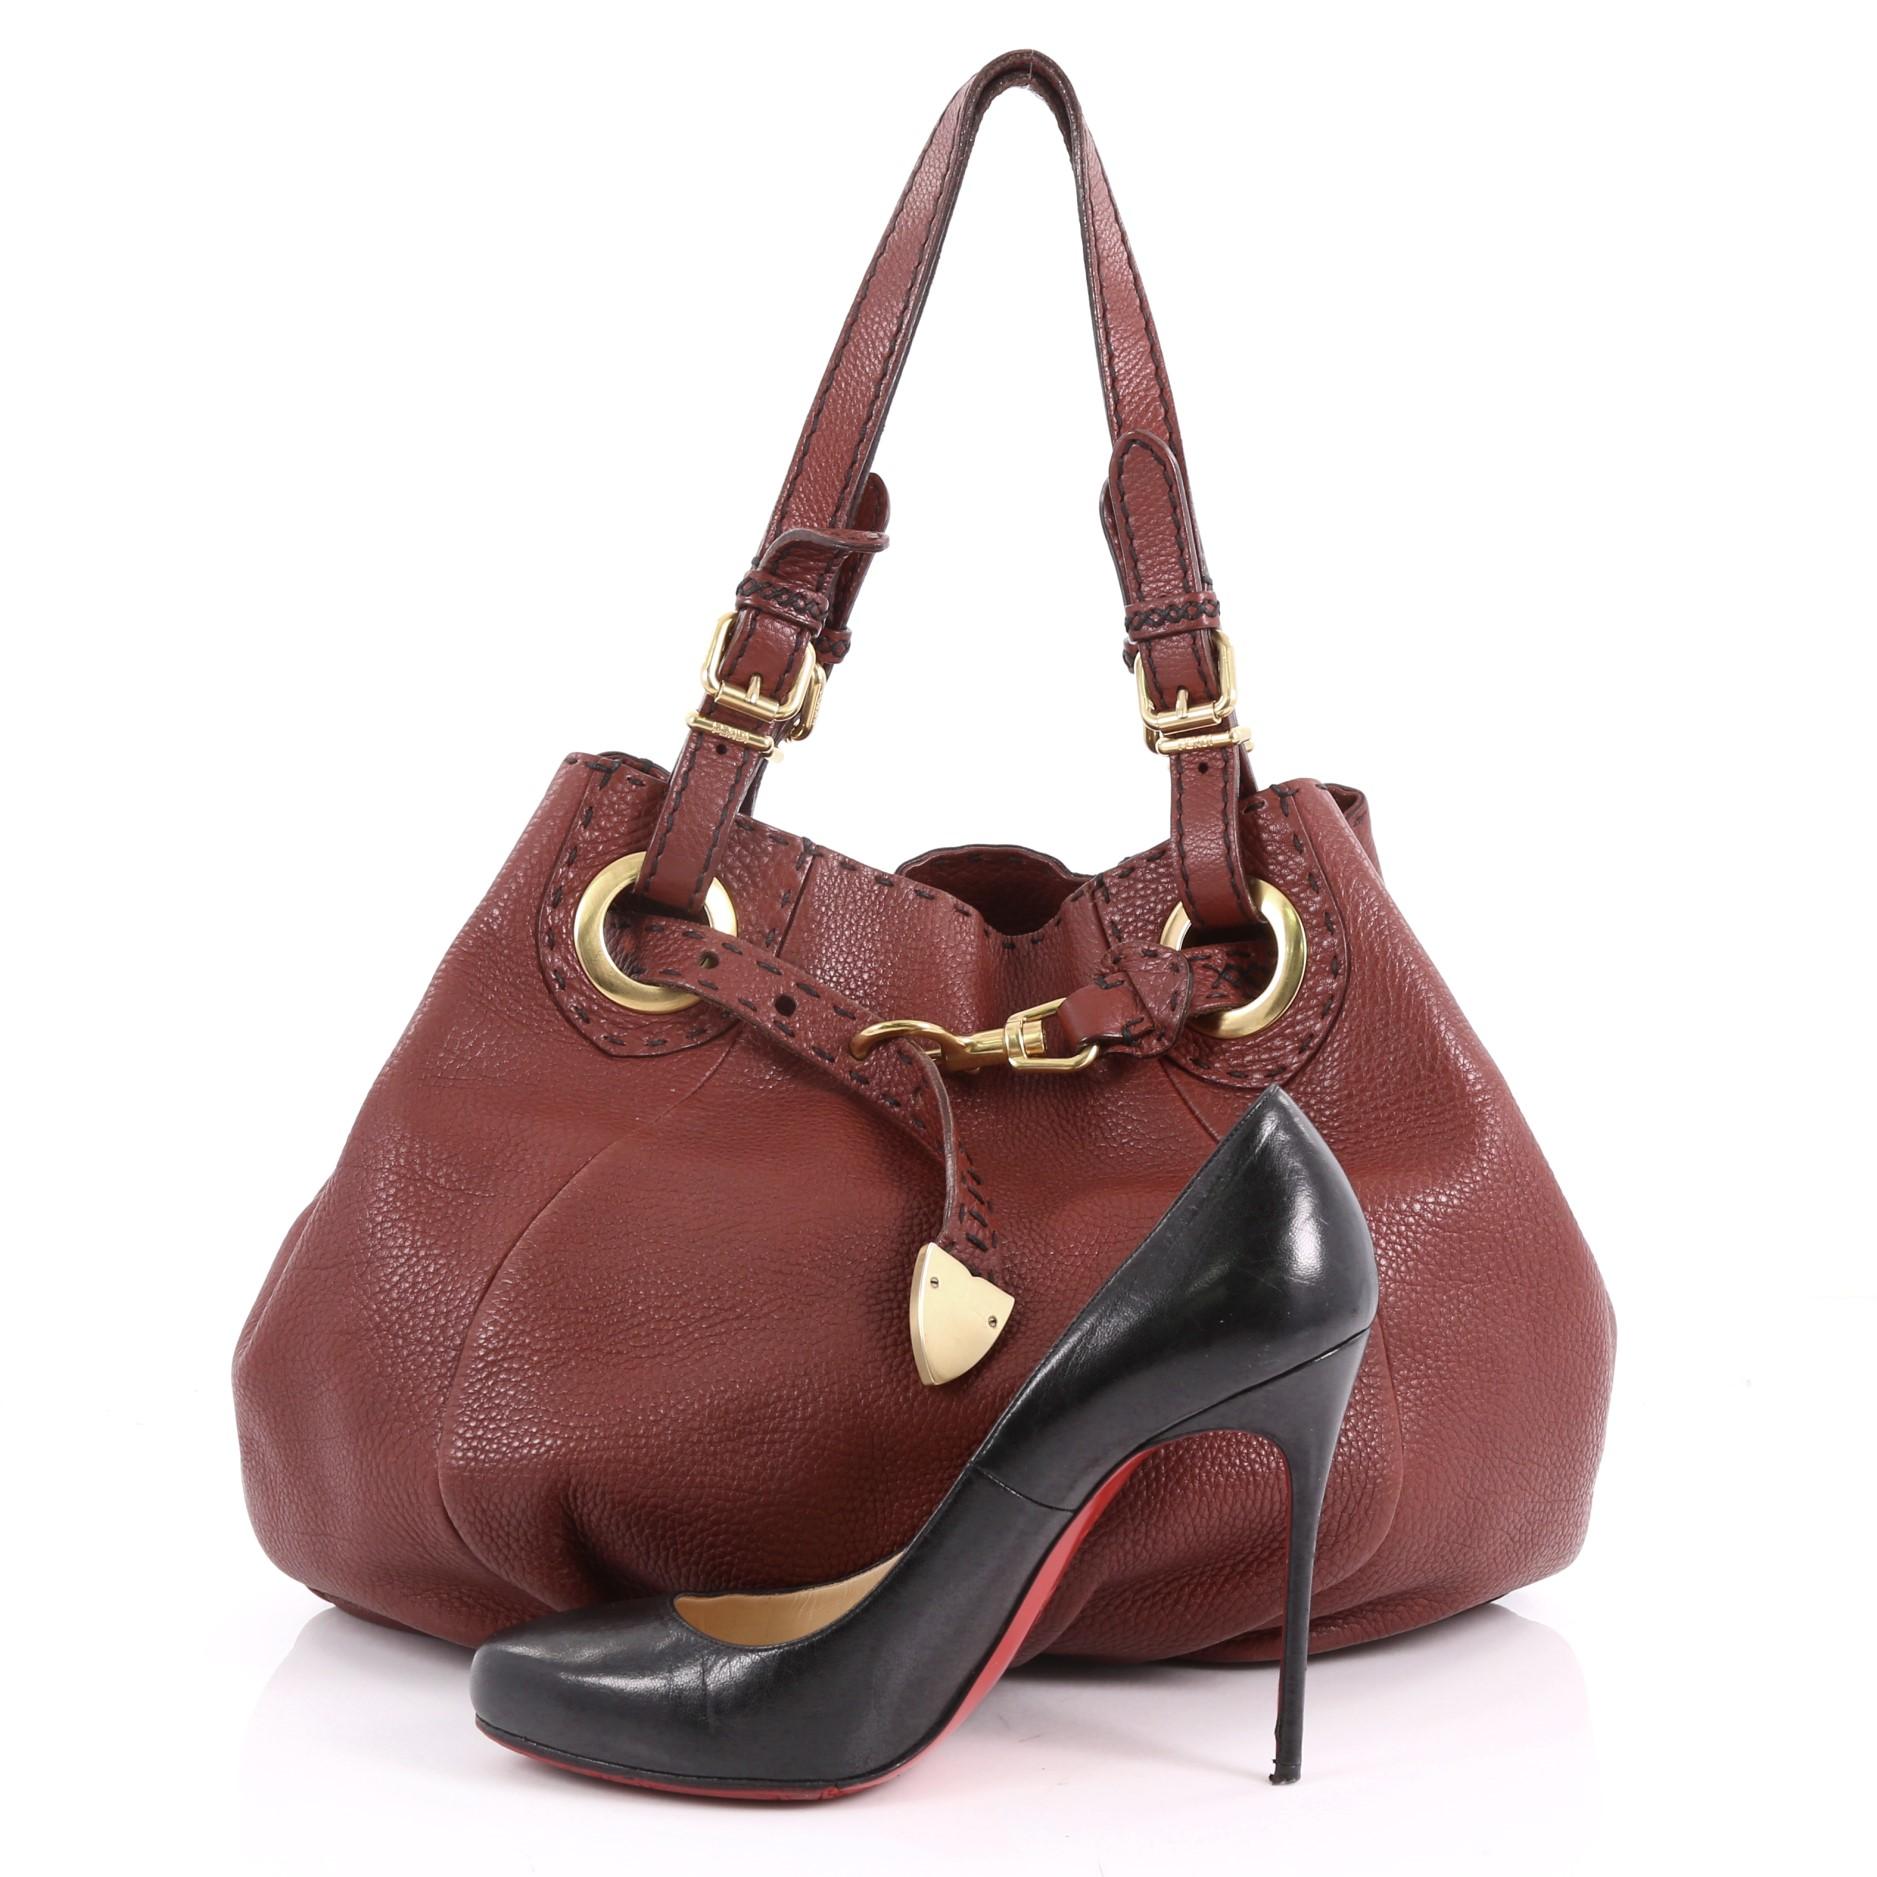 This authentic Fendi Selleria Pomodorino Bag Leather is a chic and gorgeous bag that your can wear on a daily basis. Crafted from red brown selleria leather, this bag features dual flat adjustable straps with buckle details, ruched chic silhouette